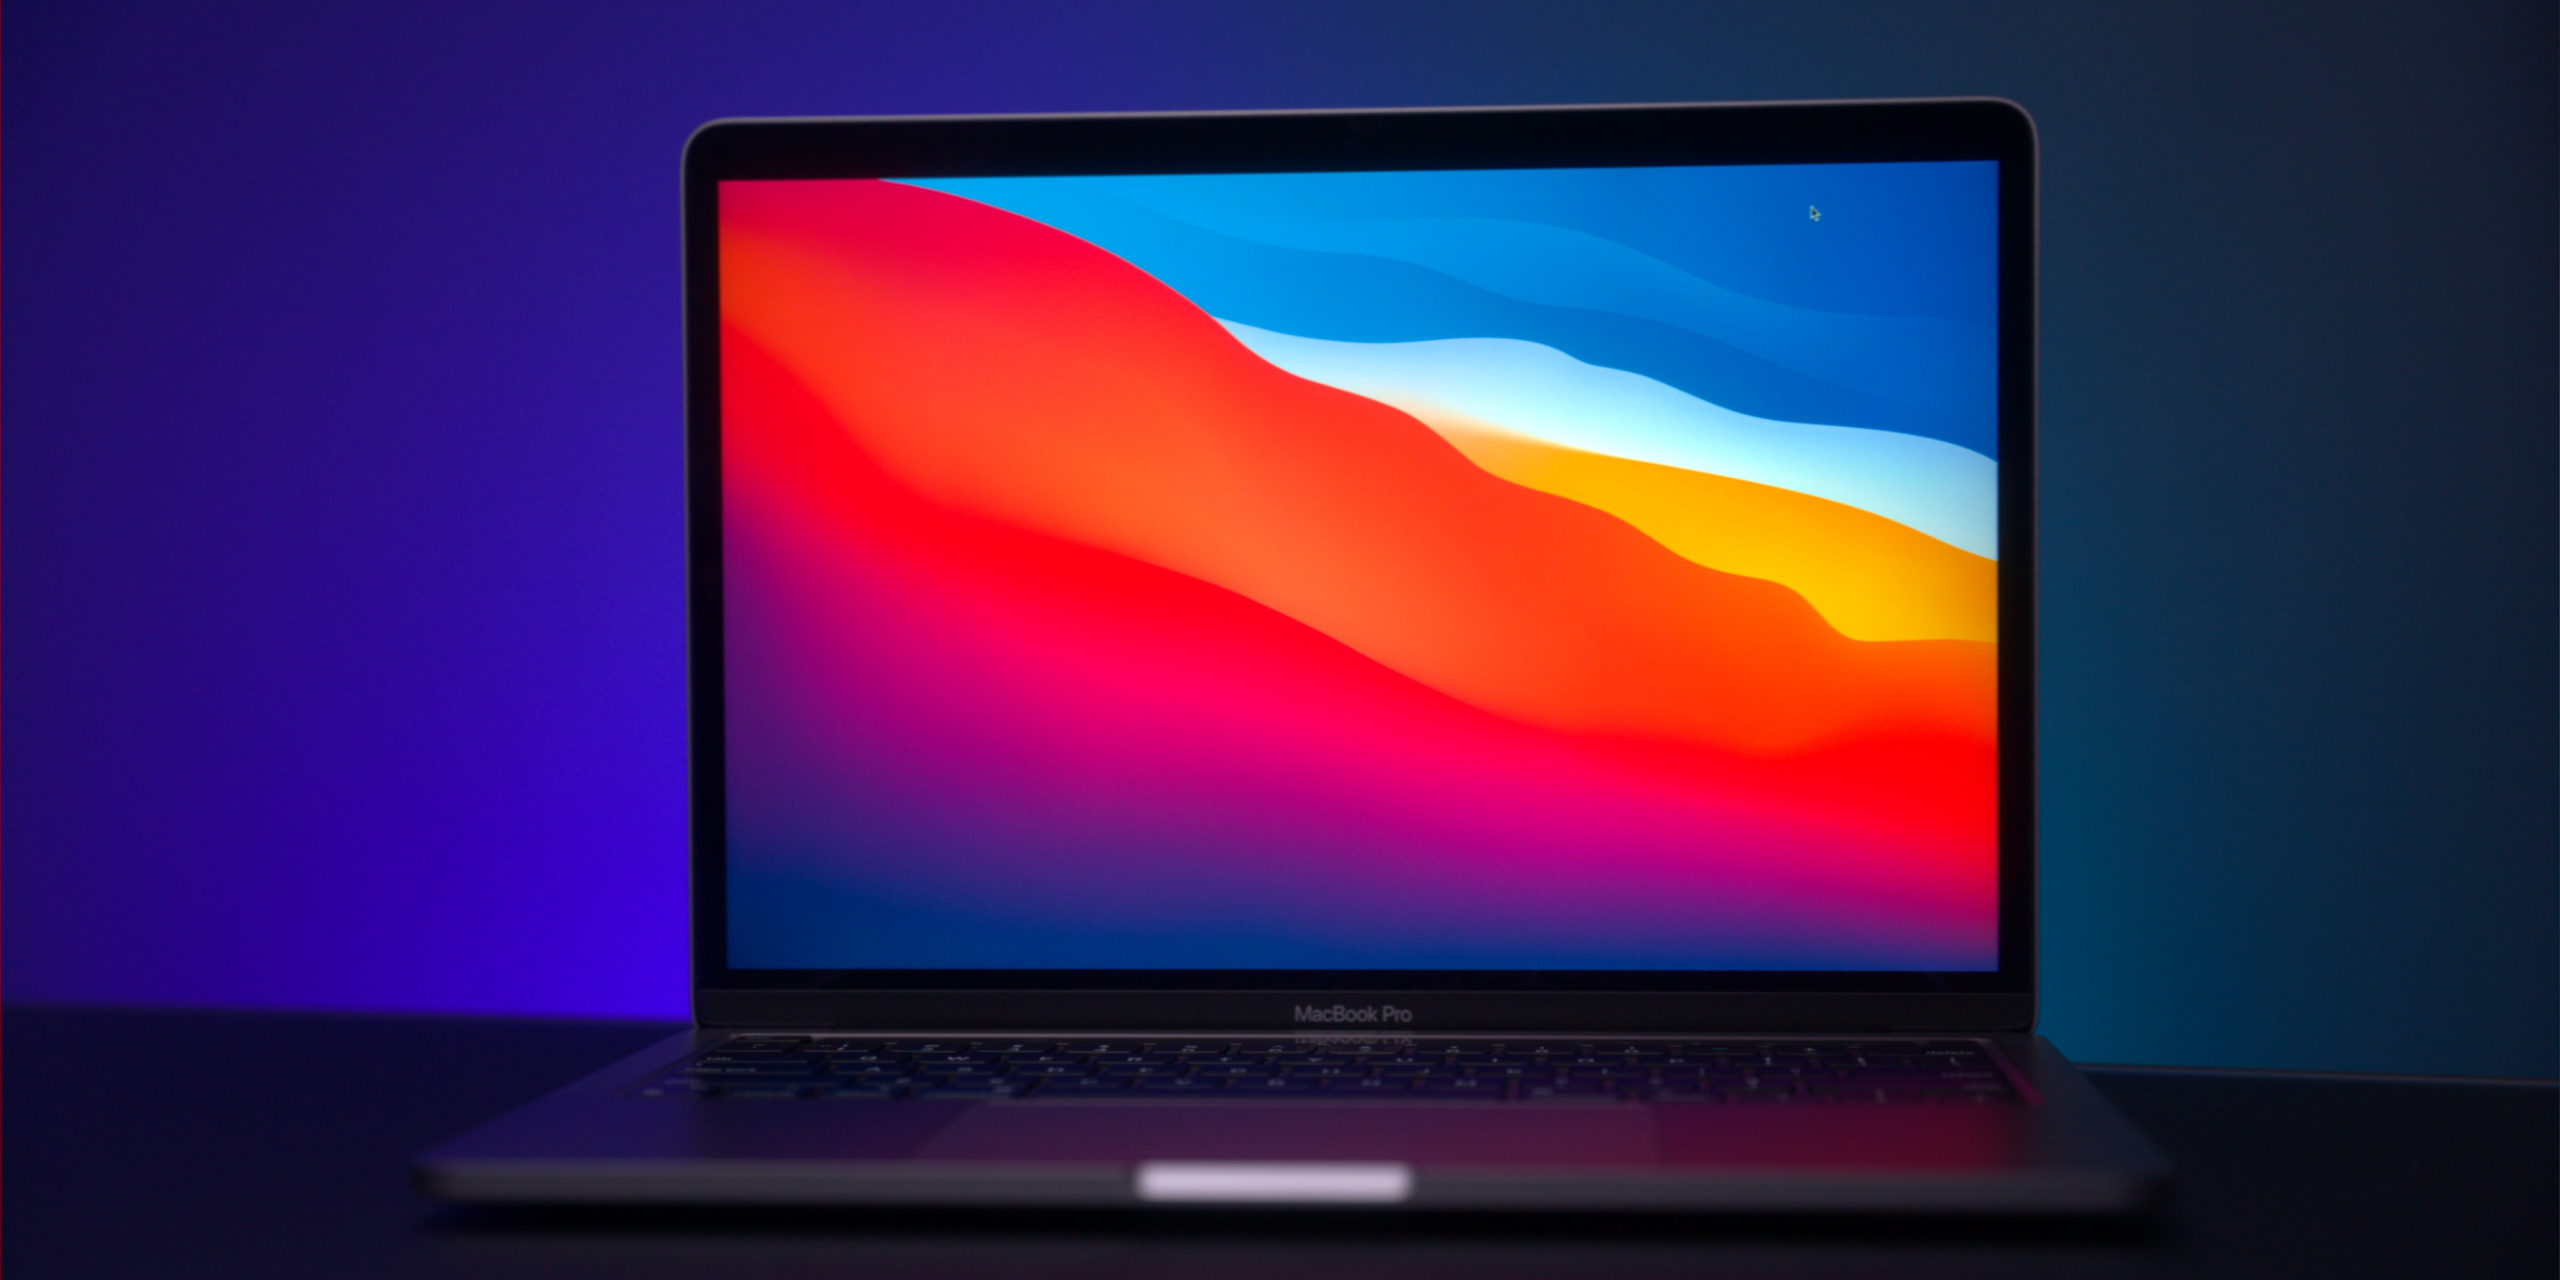 Intel shows off MacBook Pro in an ad for a processor Apple ...